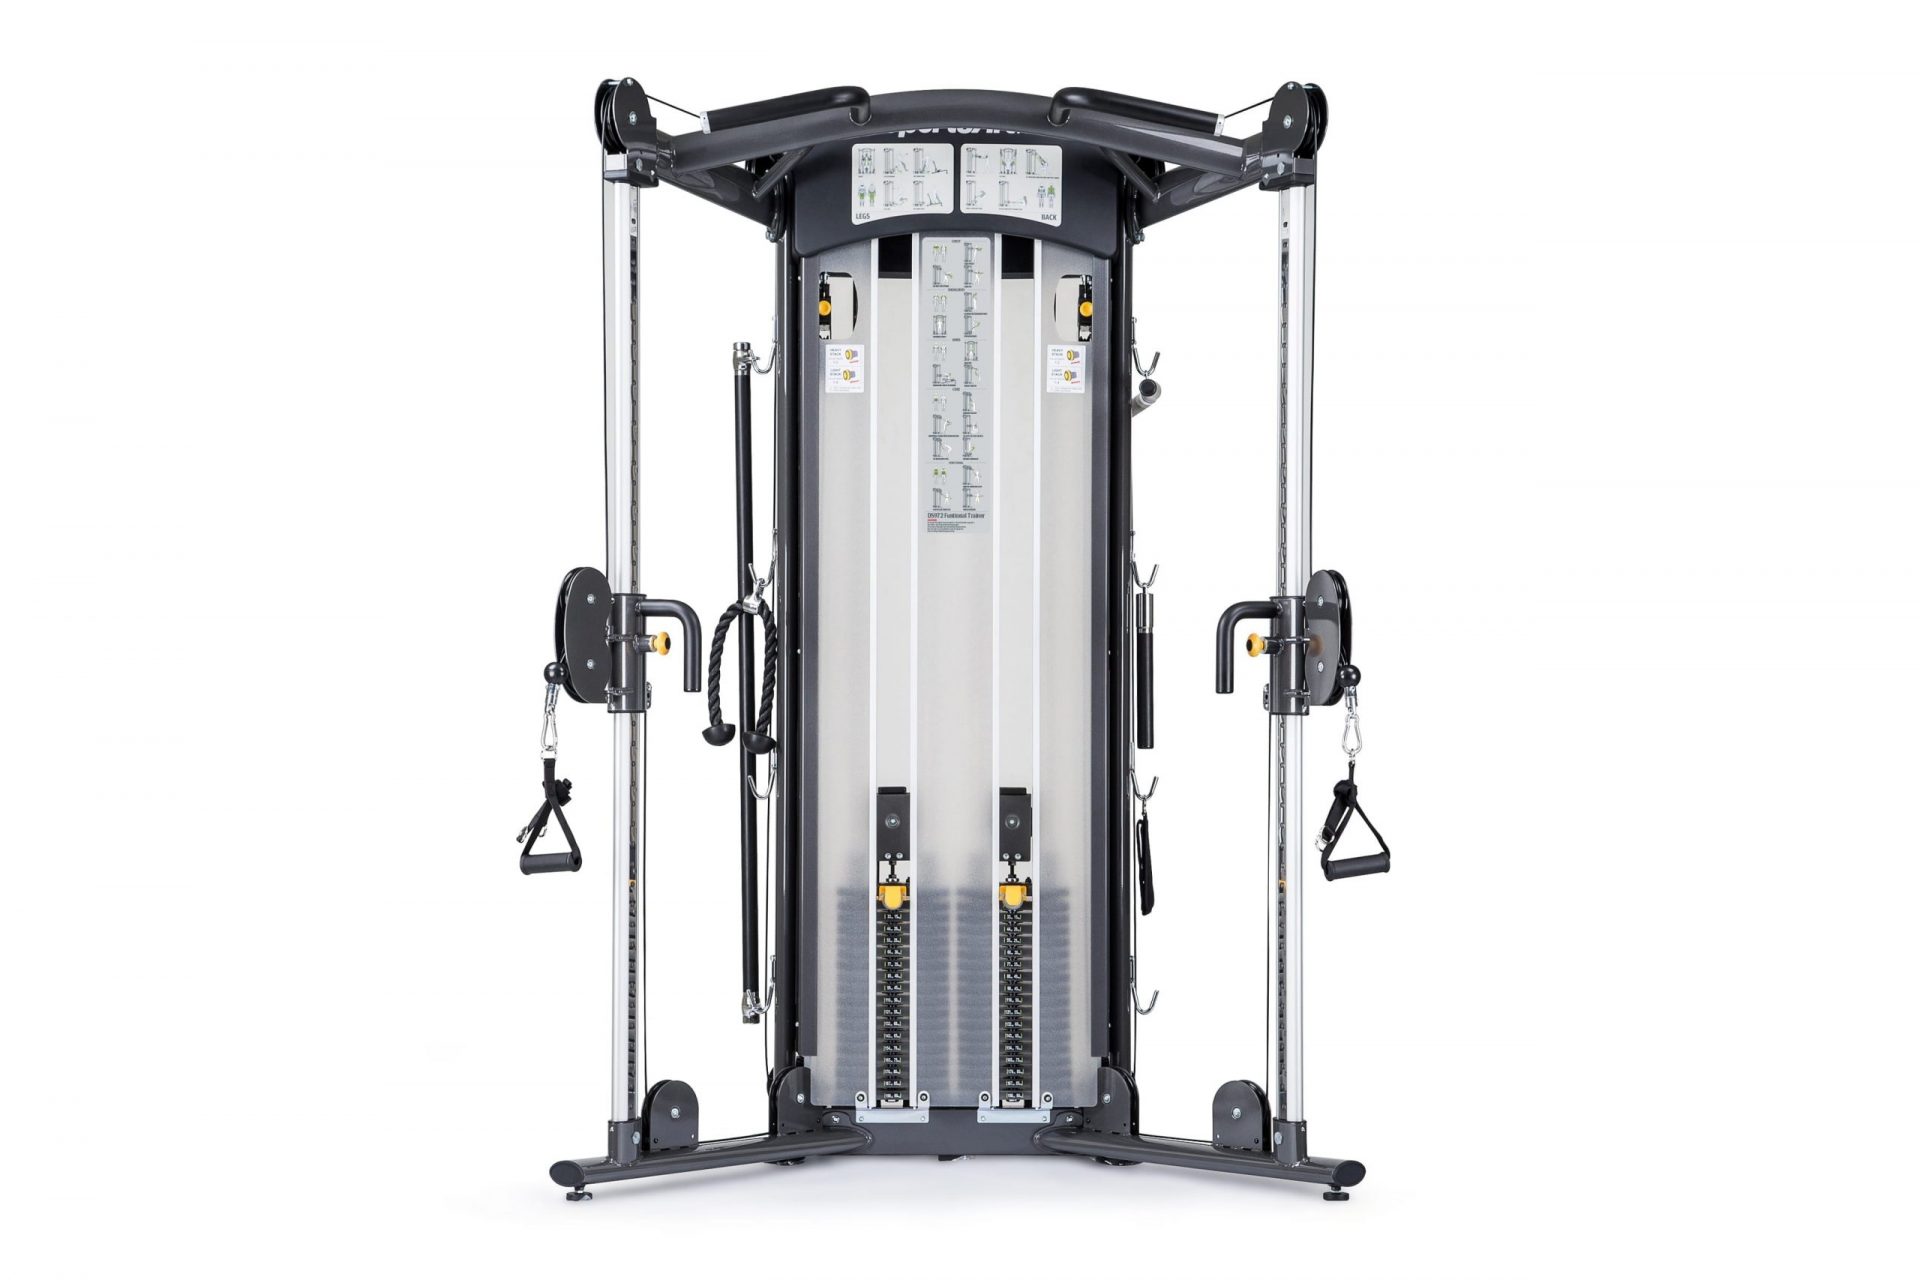 DUAL STACK FUNCTIONAL TRAINER - SPORTSART (DS972)